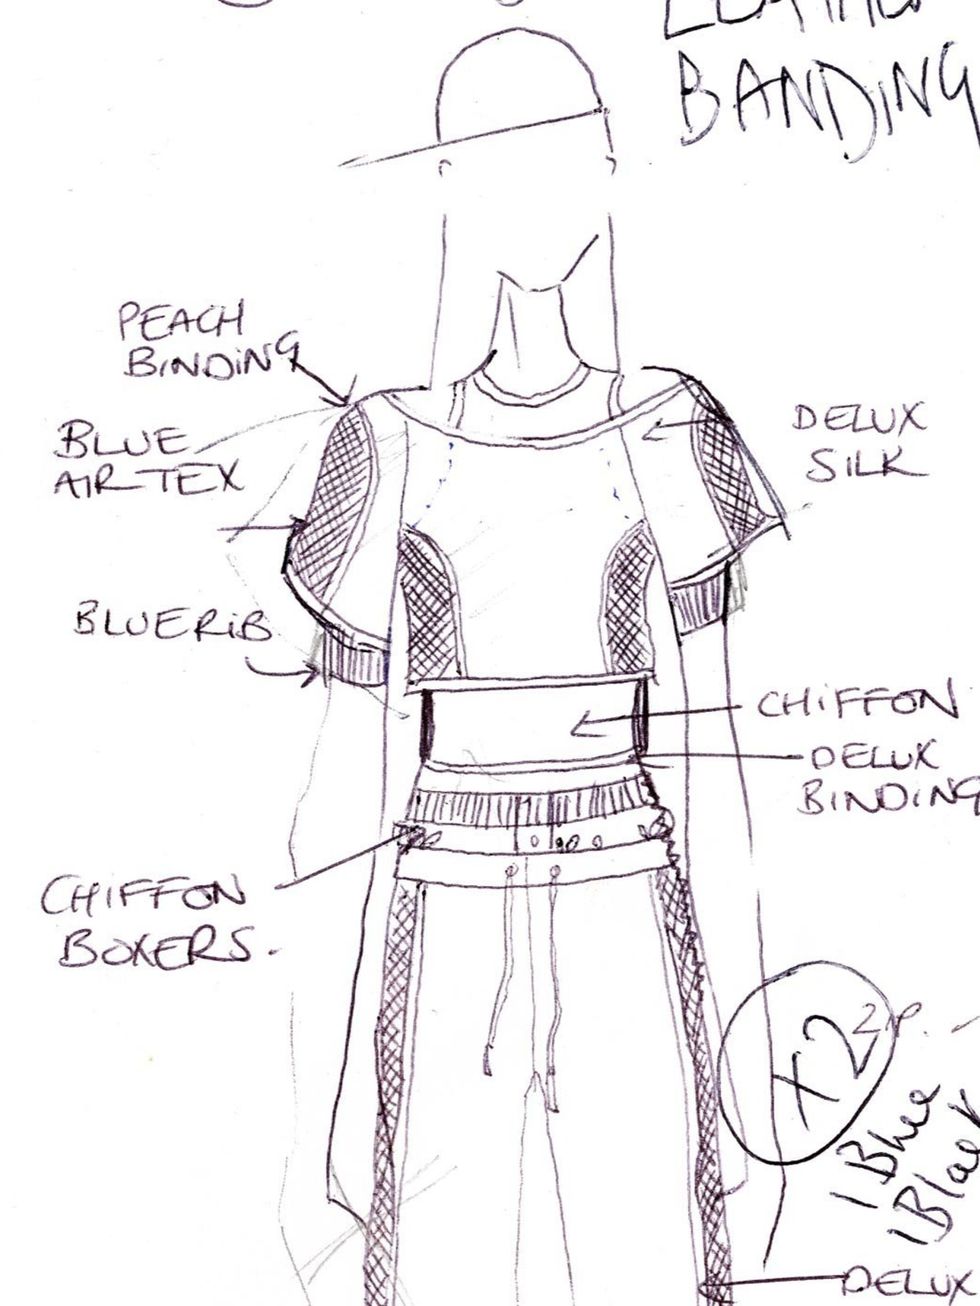 <p>Designer Katy Eary's sketch of Cheryl Cole's stage wear</p>